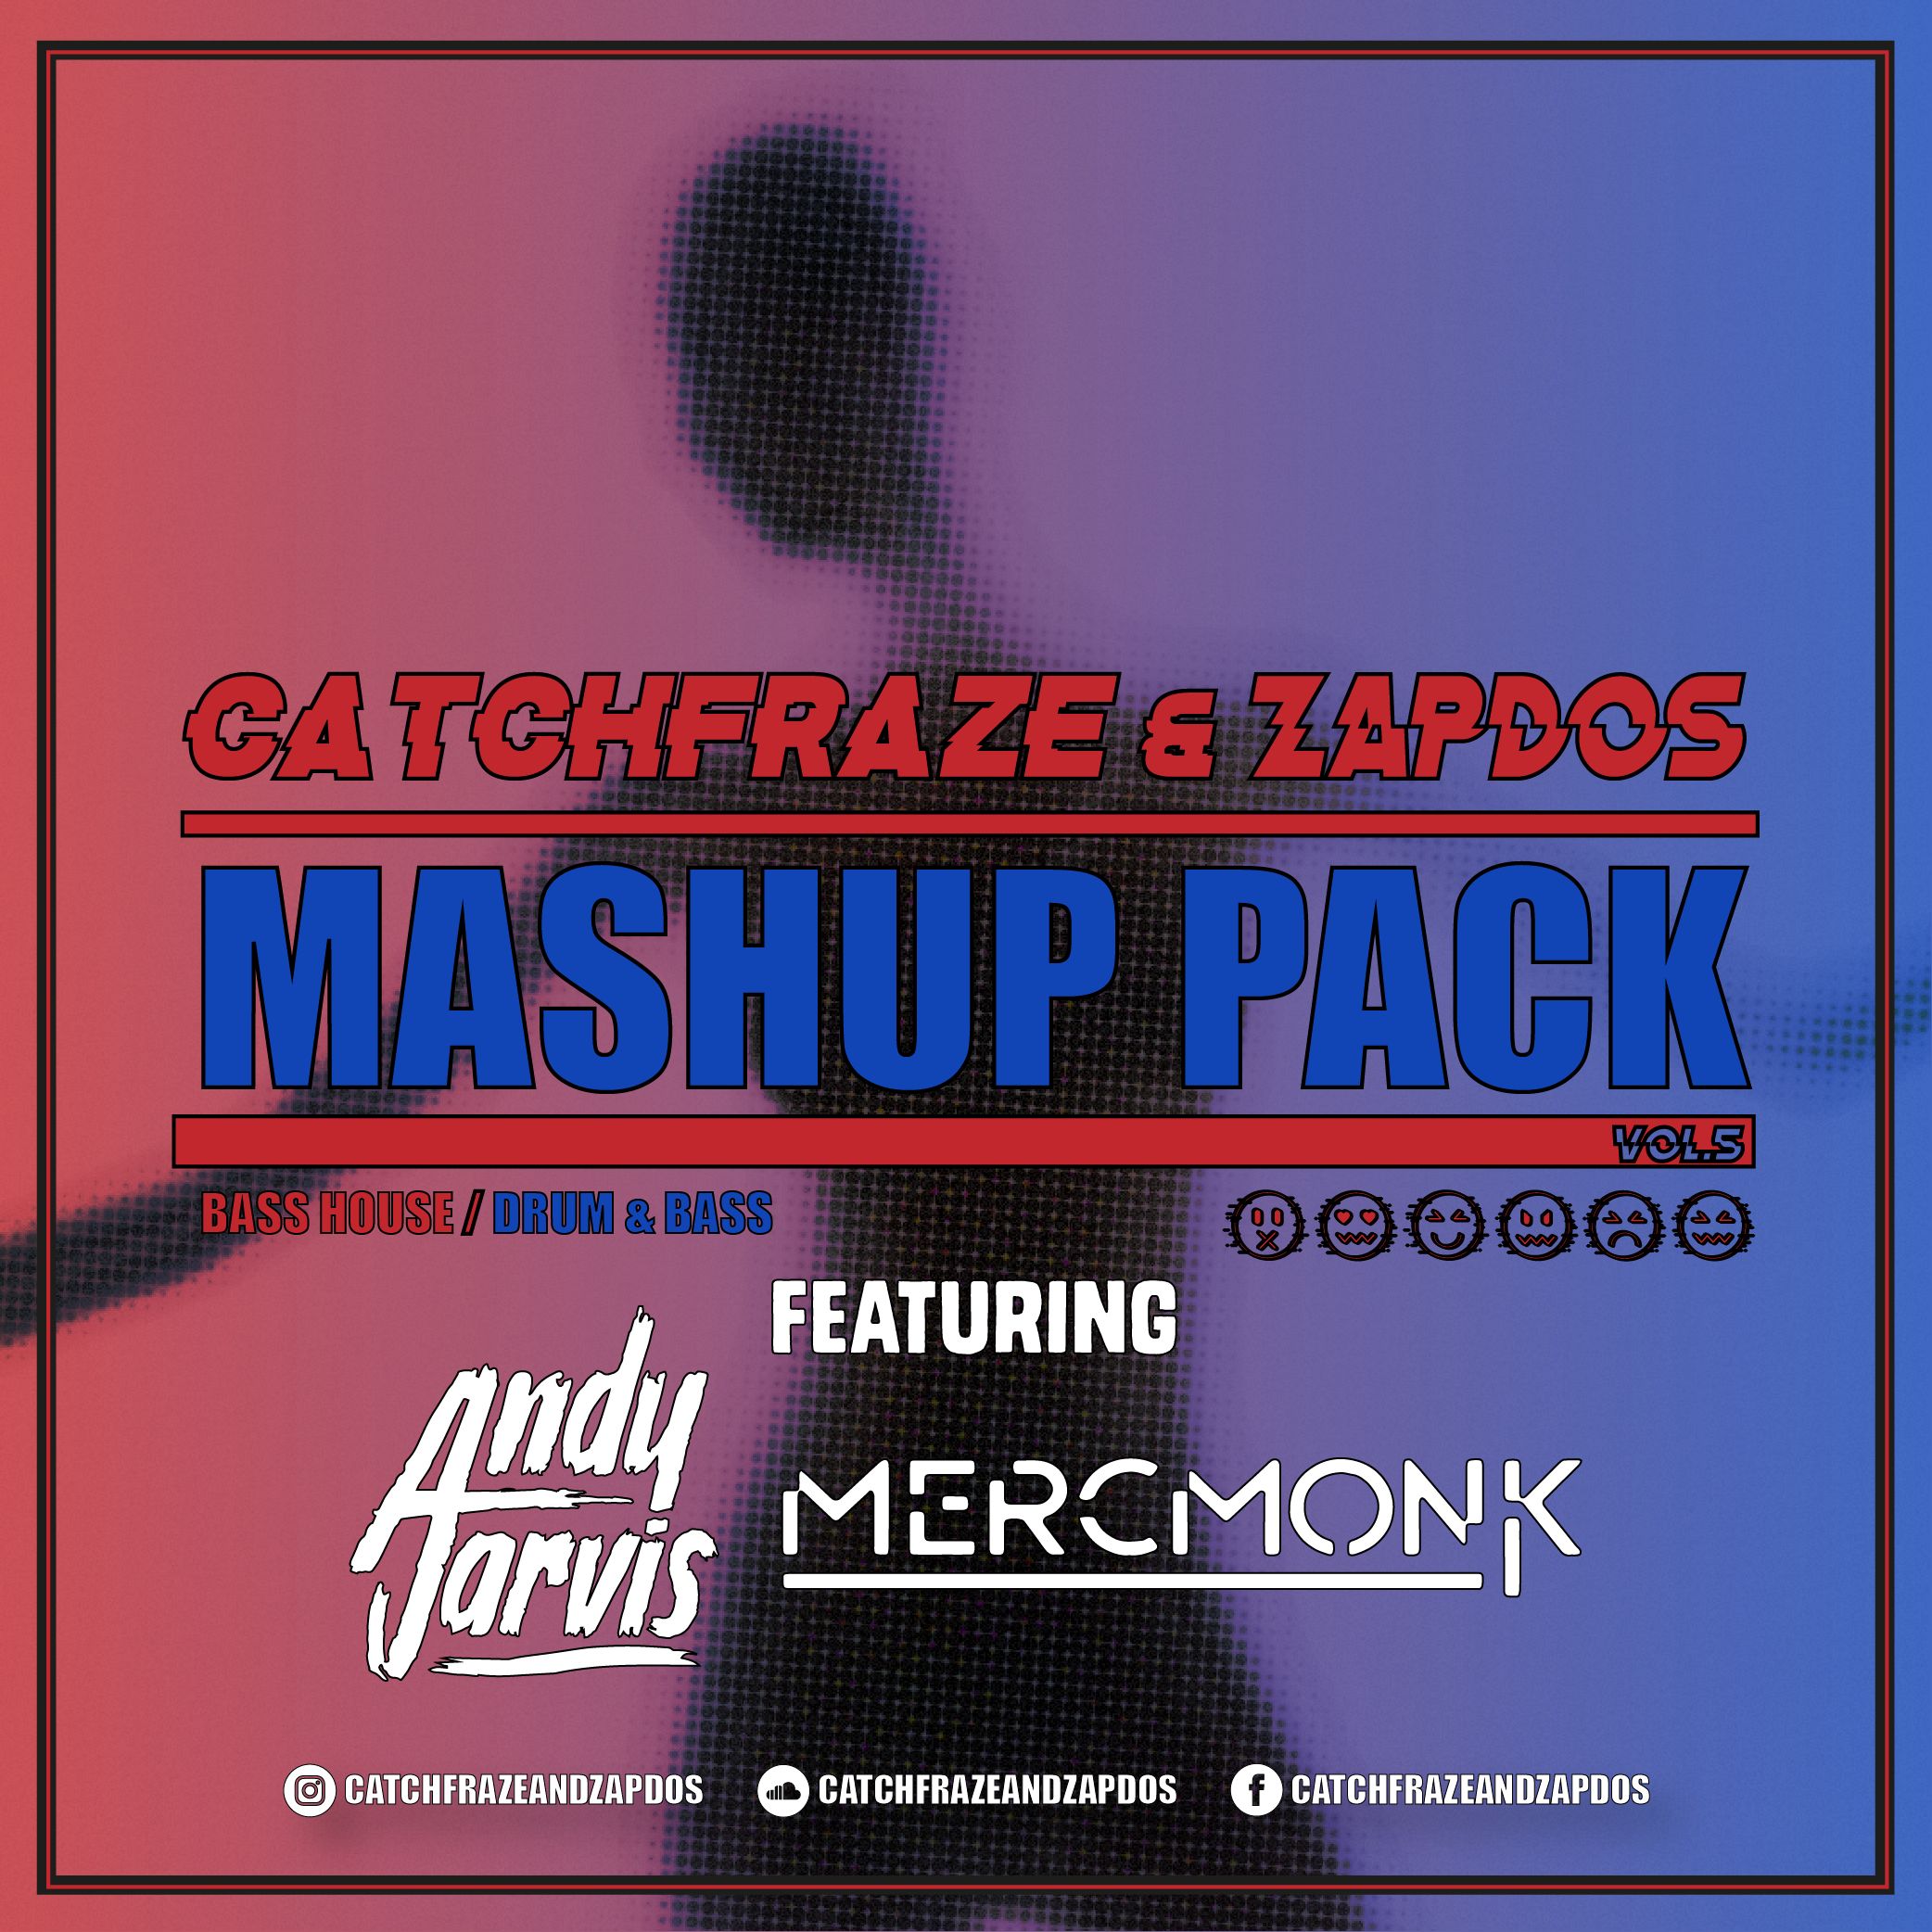 Catchfraze & Zapdos Mashup Pack Volume 5 with Andy Jarvis & Mercmonk